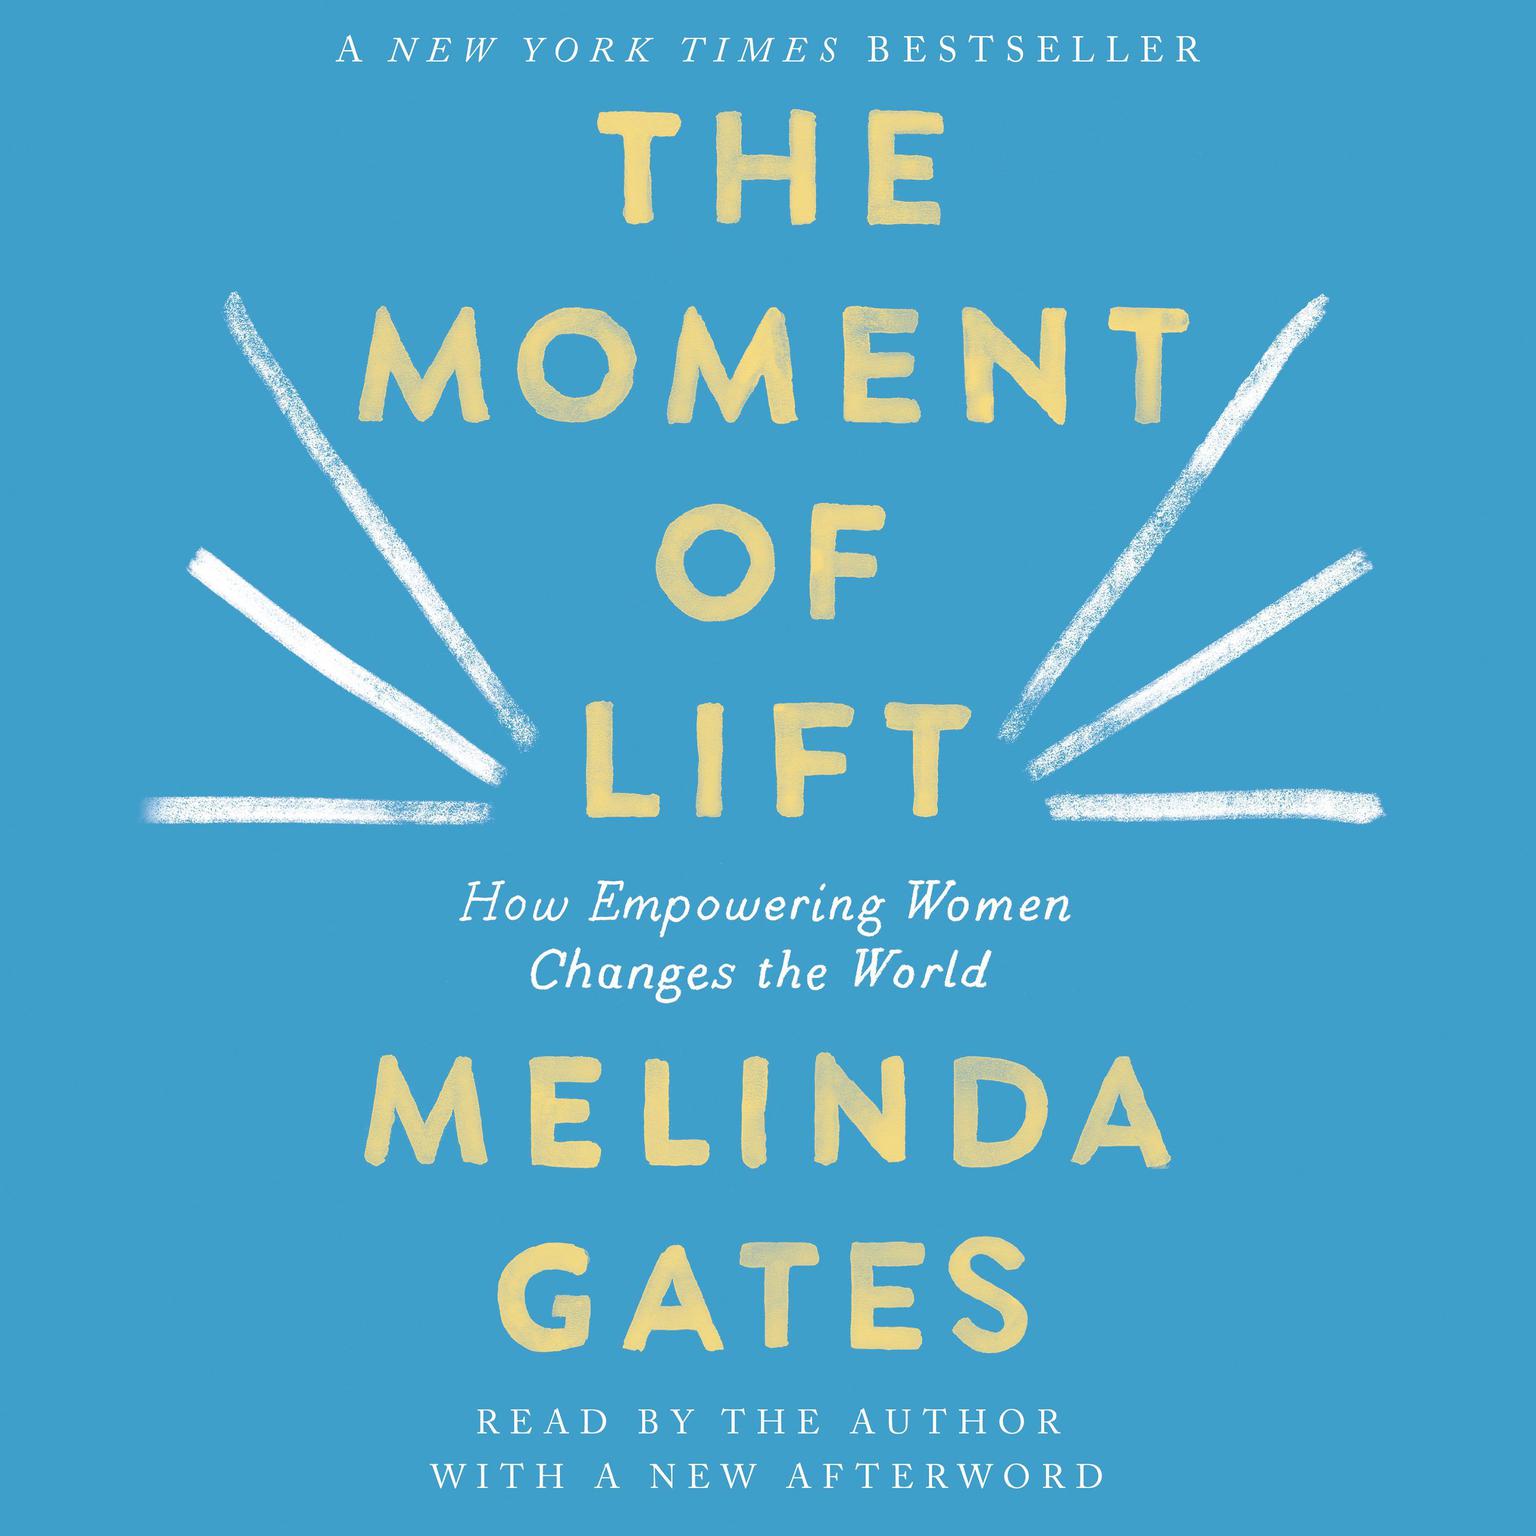 The Moment of Lift: How Empowering Women Changes the World Audiobook, by Melinda Gates